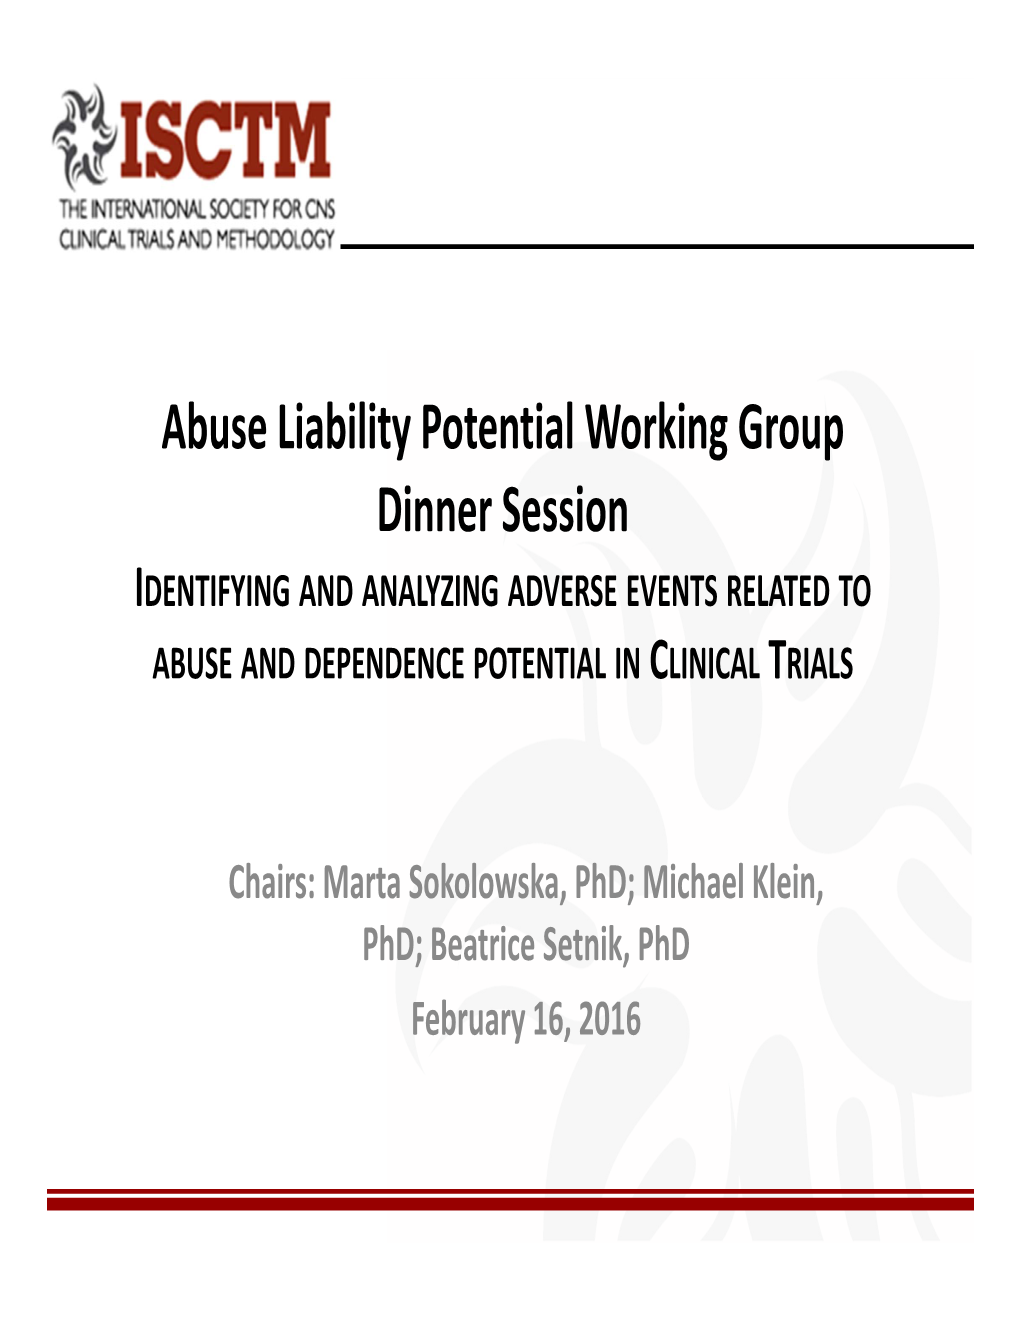 Abuse Liability Potential Working Group Dinner Session IDENTIFYING and ANALYZING ADVERSE EVENTS RELATED to ABUSE and DEPENDENCE POTENTIAL in CLINICAL TRIALS